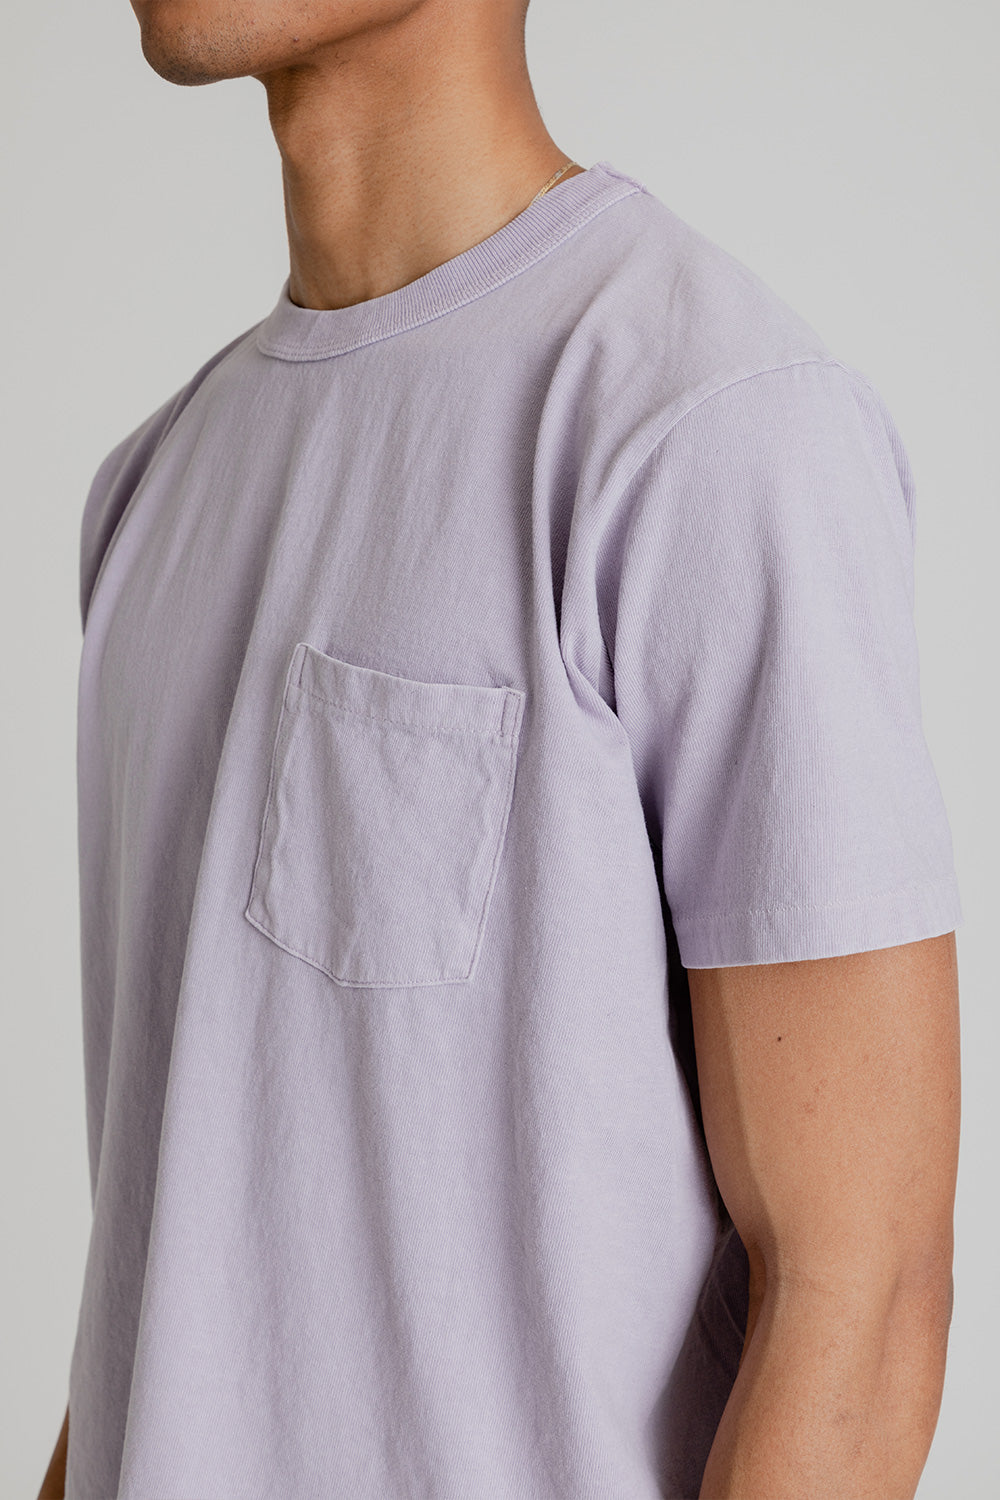 Velva Sheen Pigment Dyed Pocket Tee in Orchid